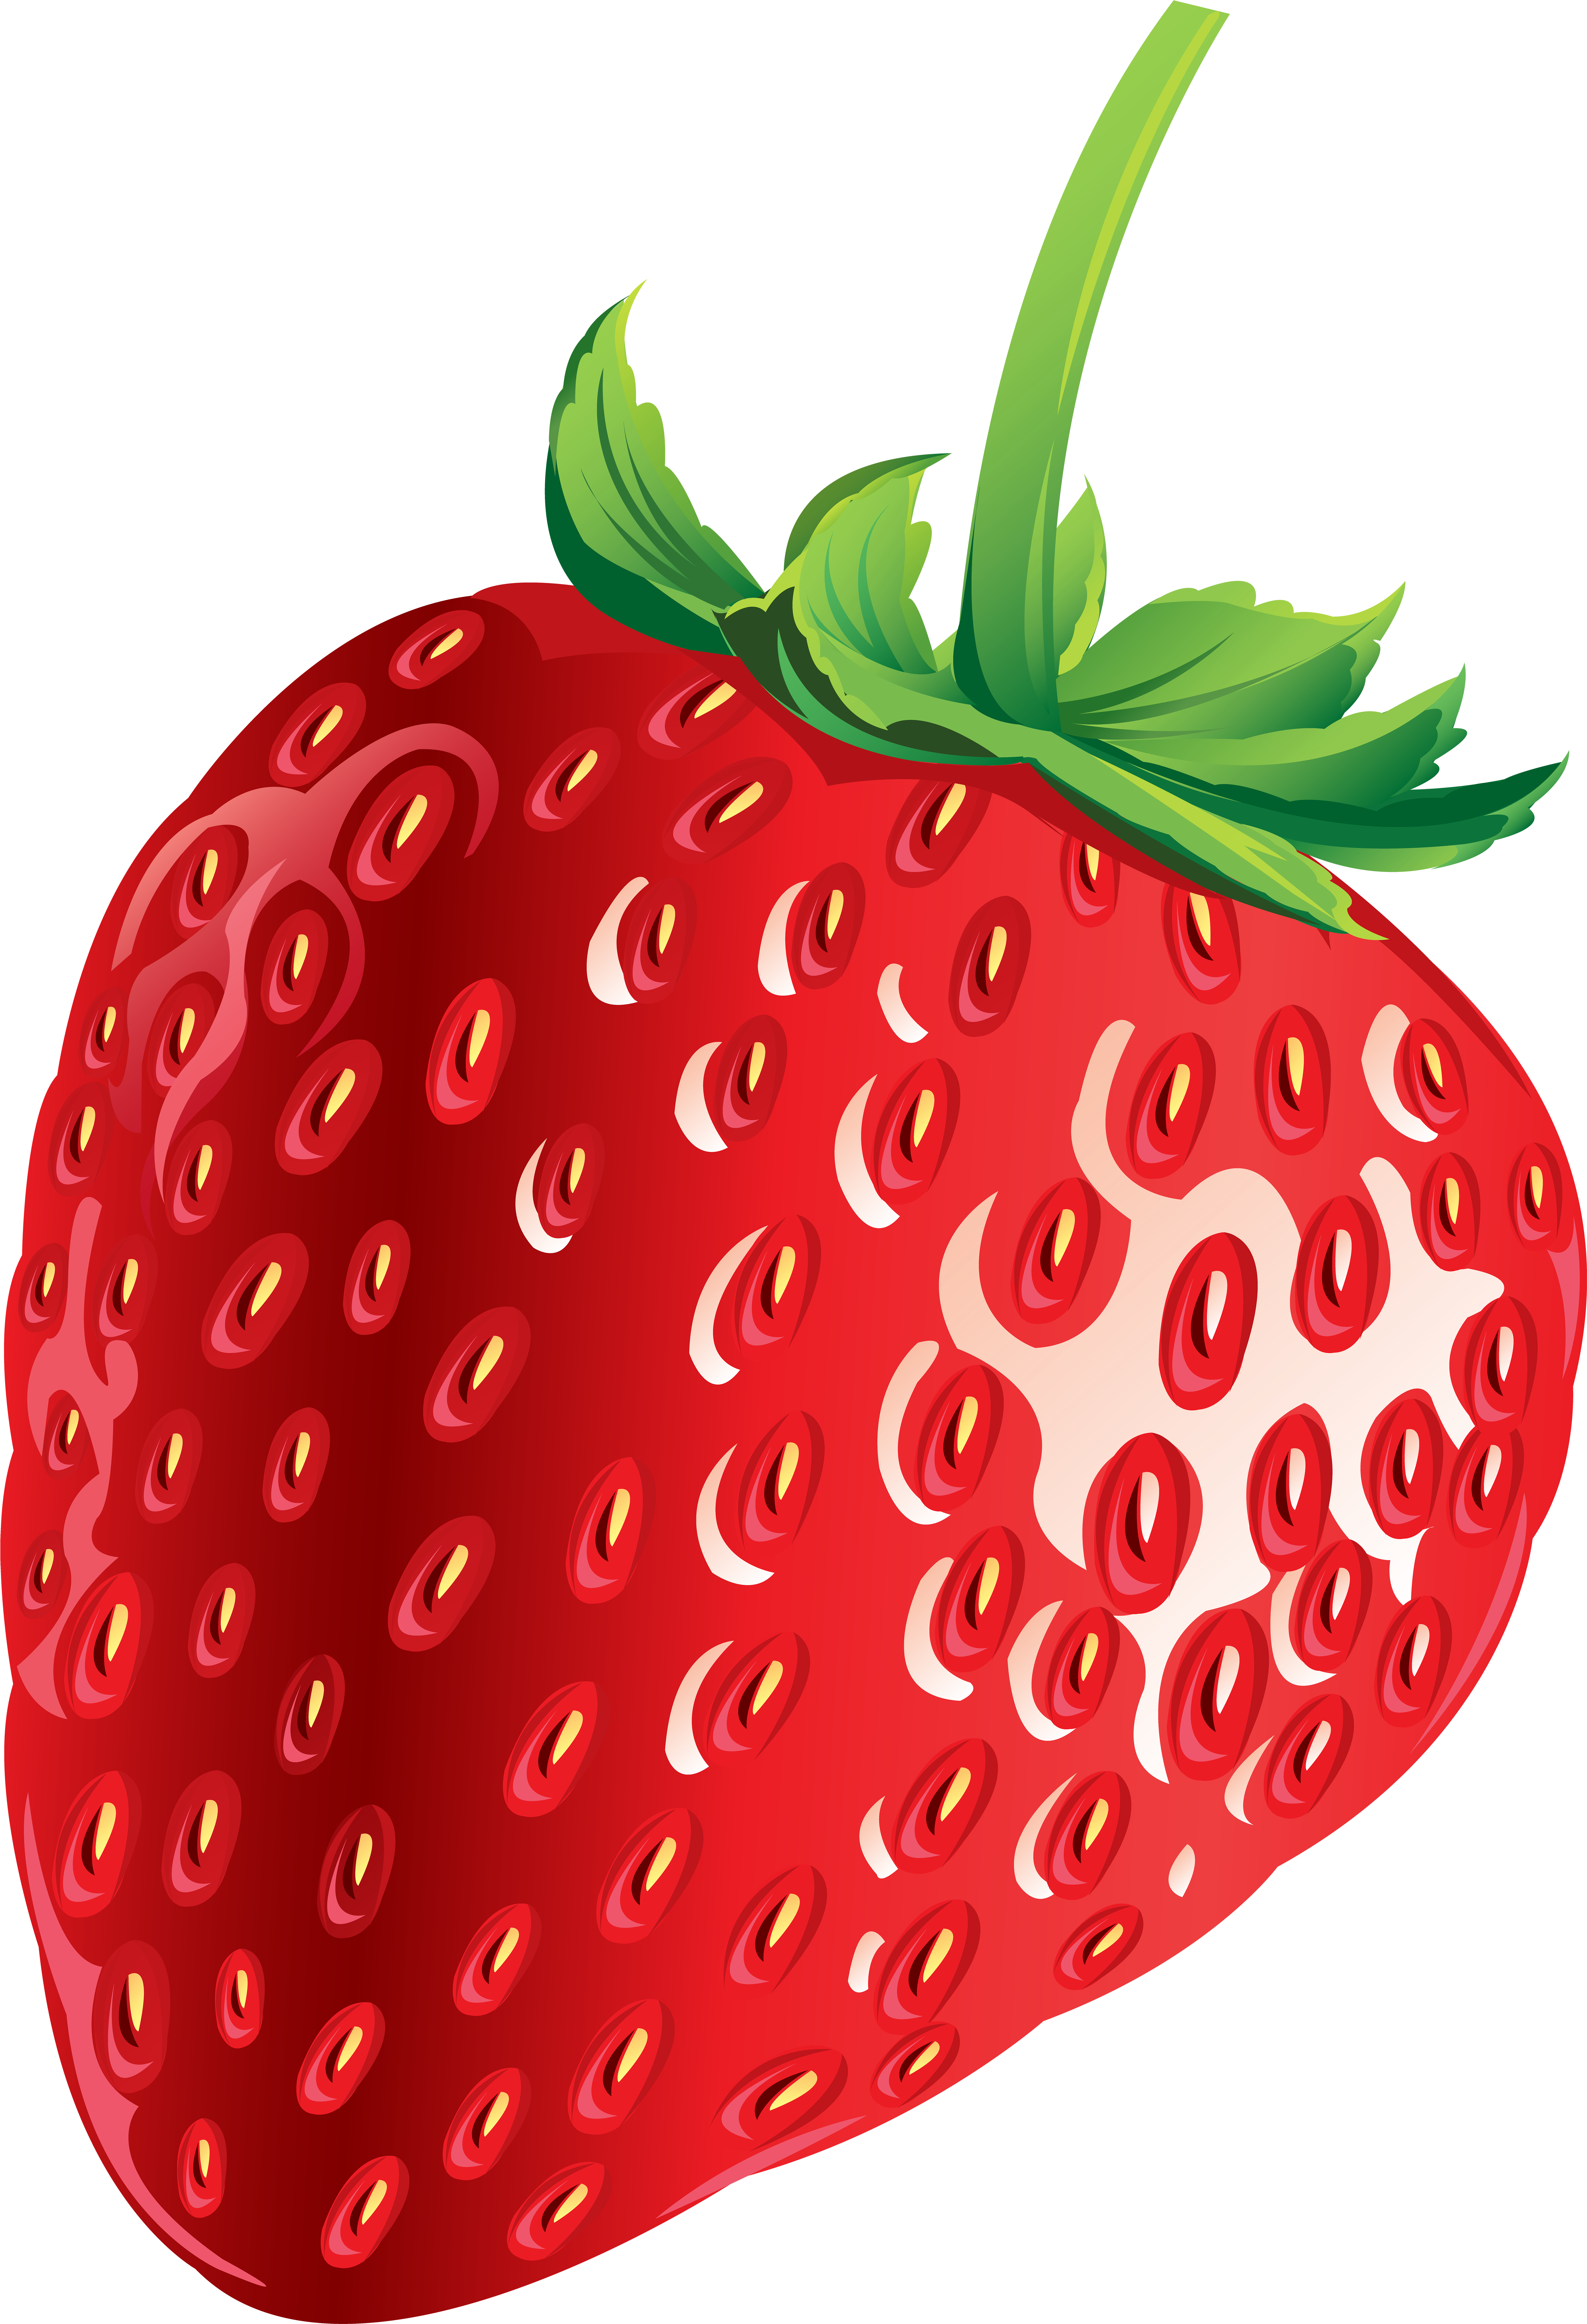 HD Strawberry Png, Strawberry Pictures, High Quality Images.